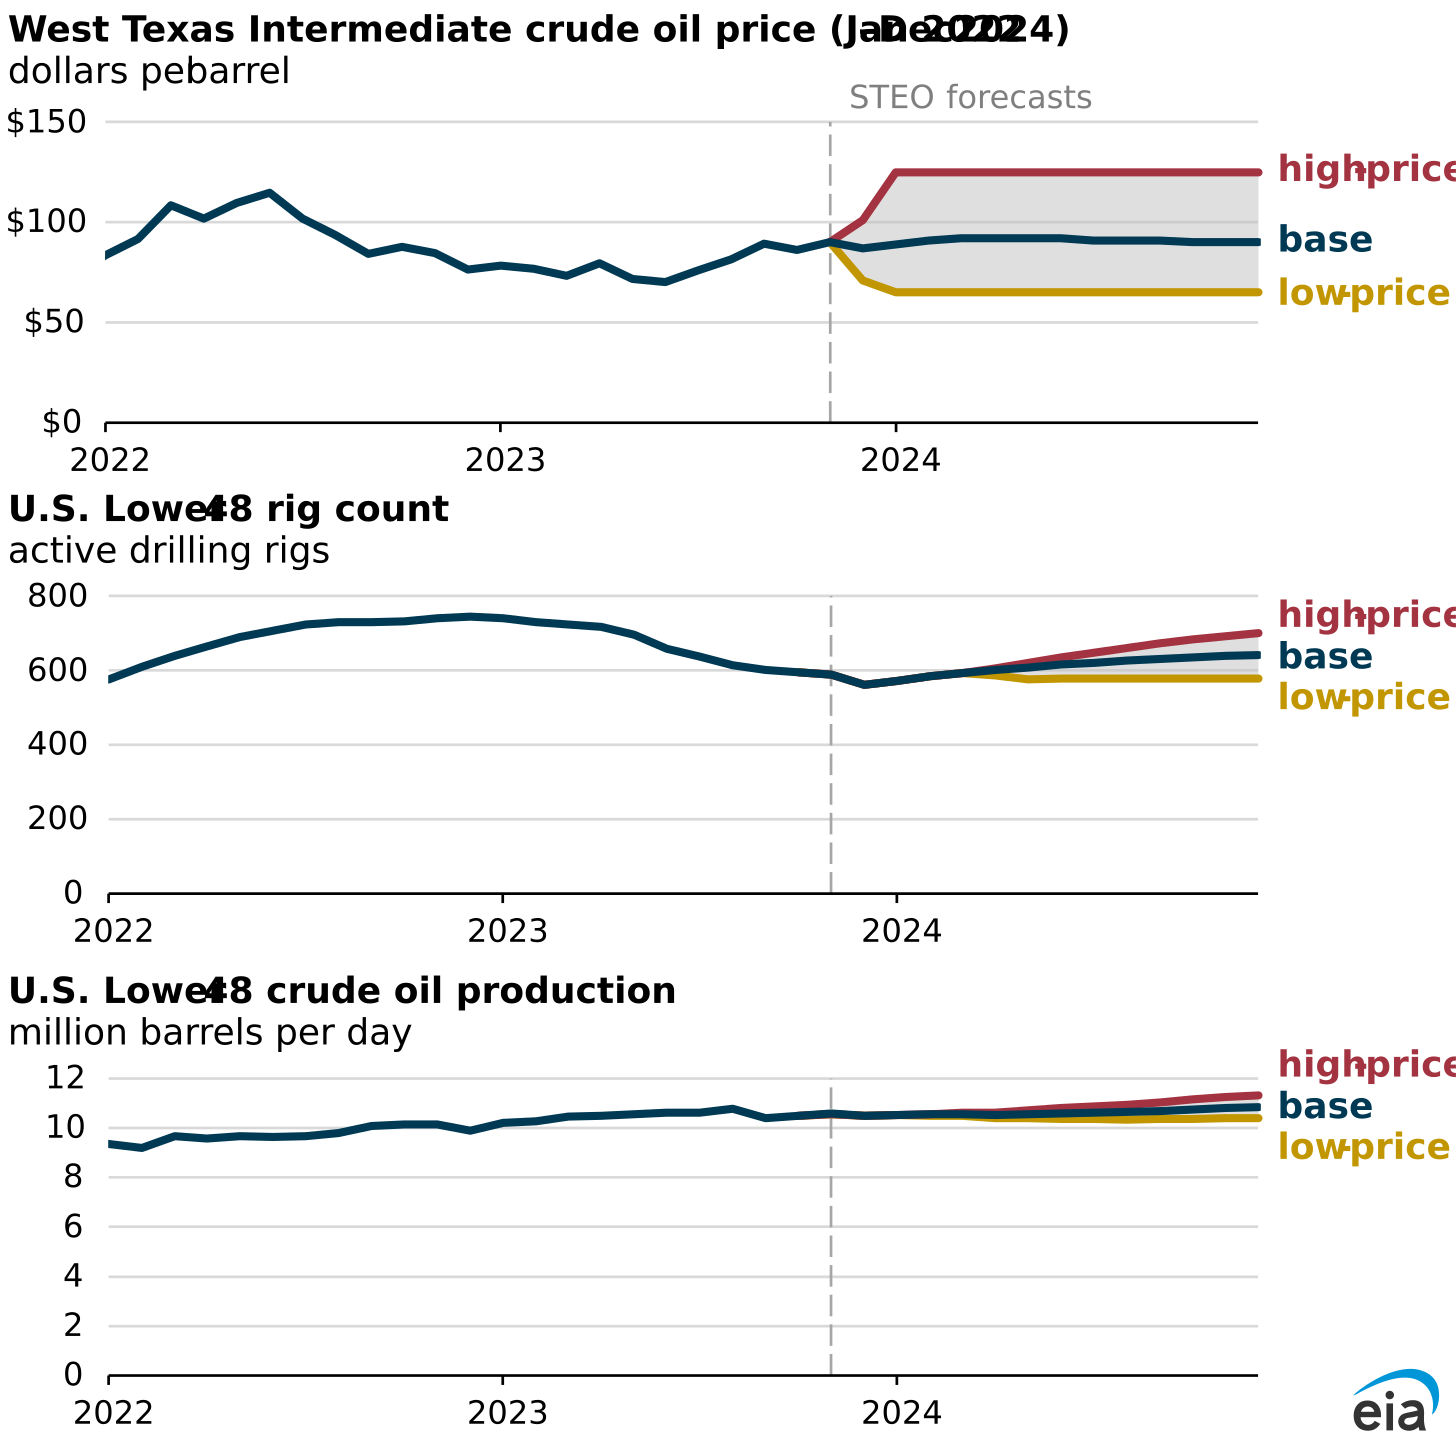 data visualization of crude oil prices, rig counts, and U.S. crude oil production in three cases